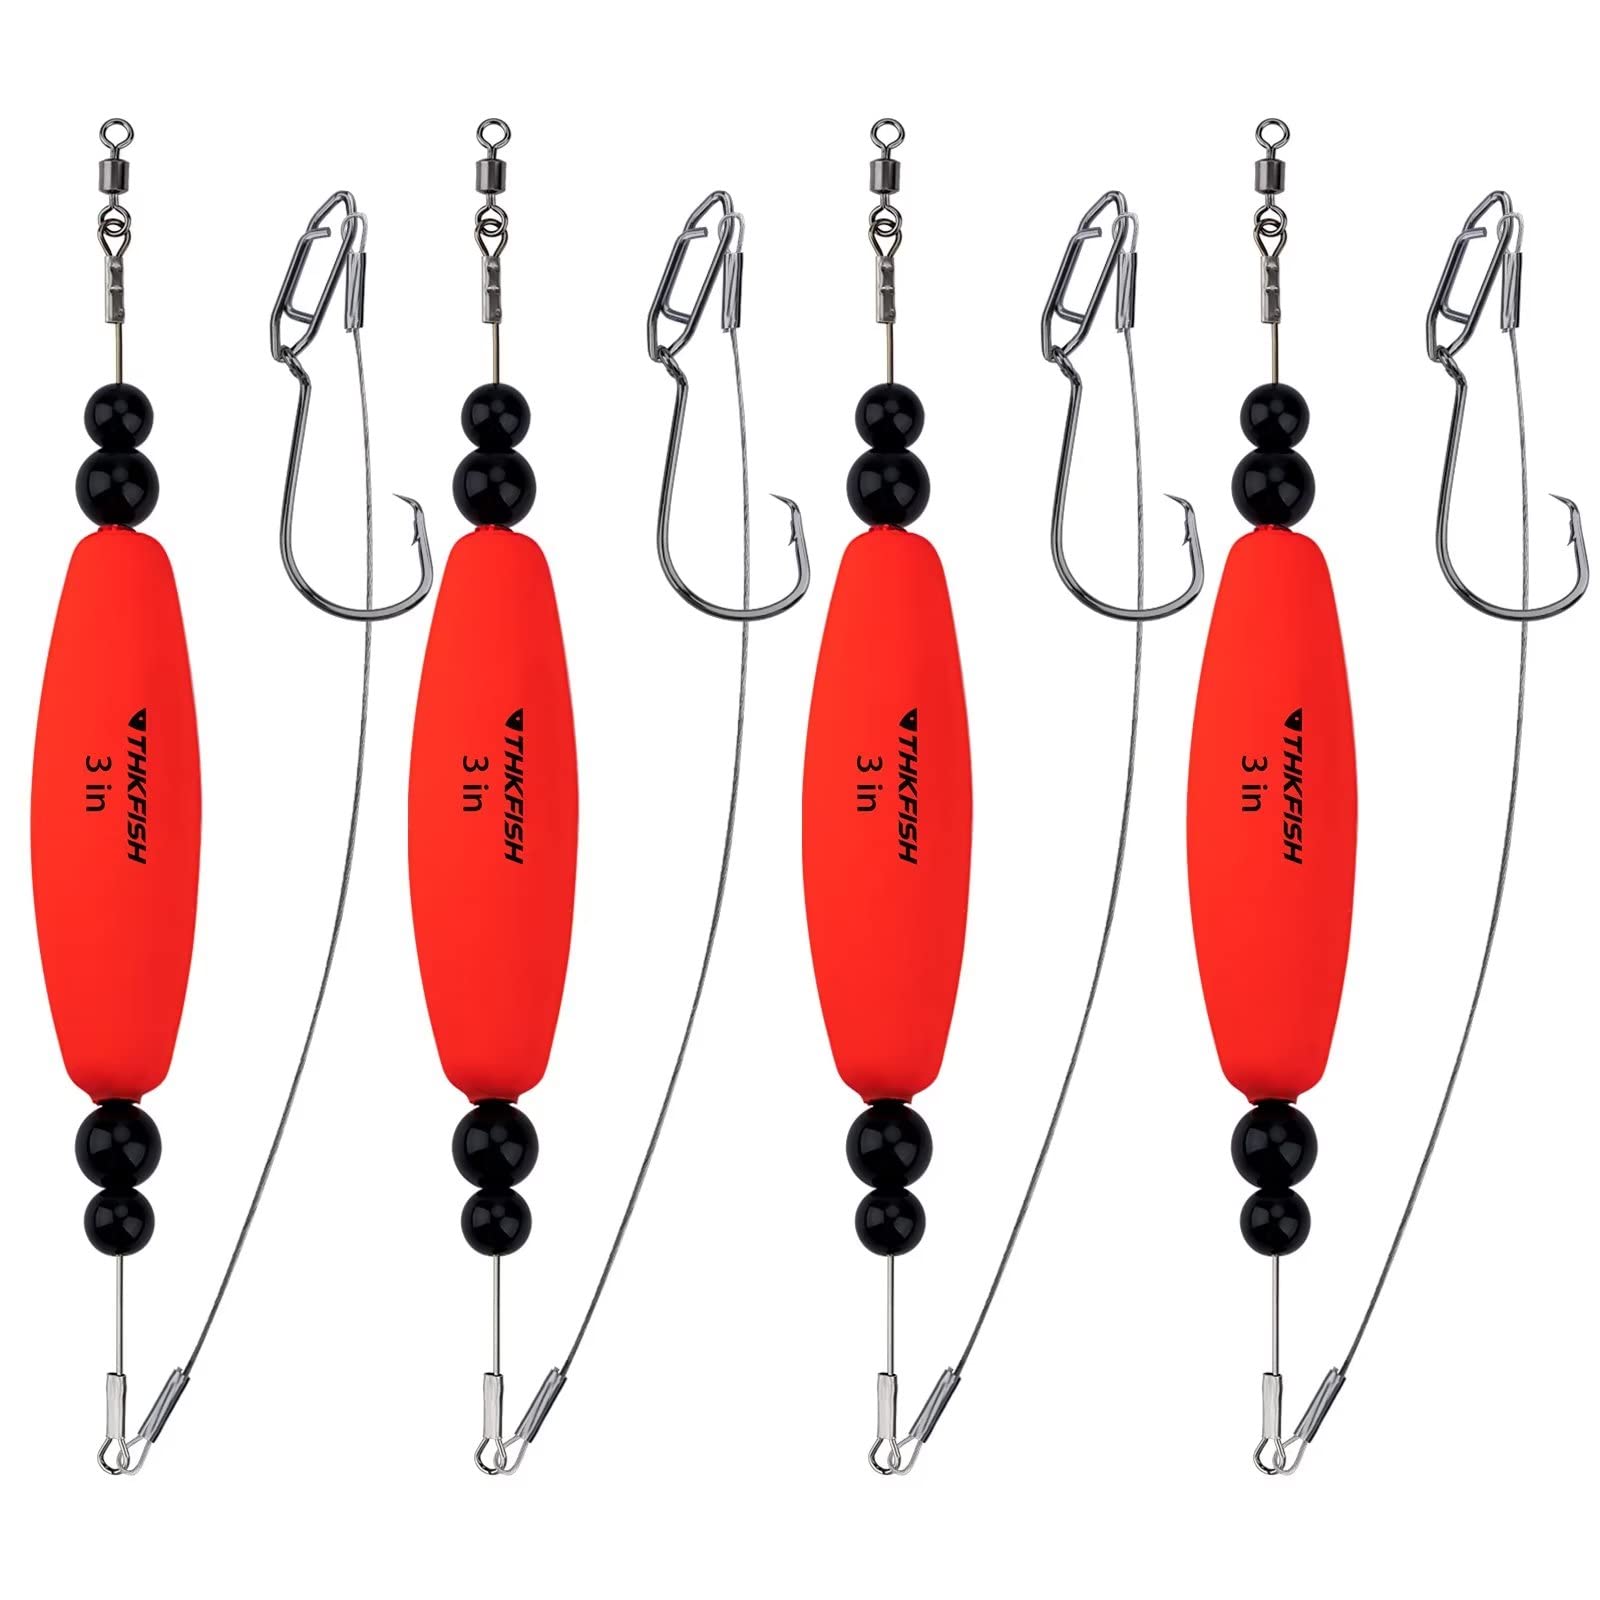 THKFISH Fishing Bobbers Catfish Float Rigs Santee Rig for Catfishing Tackle  Rattling Cork EVA Foam Peg Floats Bait Rigs 4PCS 2.5in 3in 2.5 RED